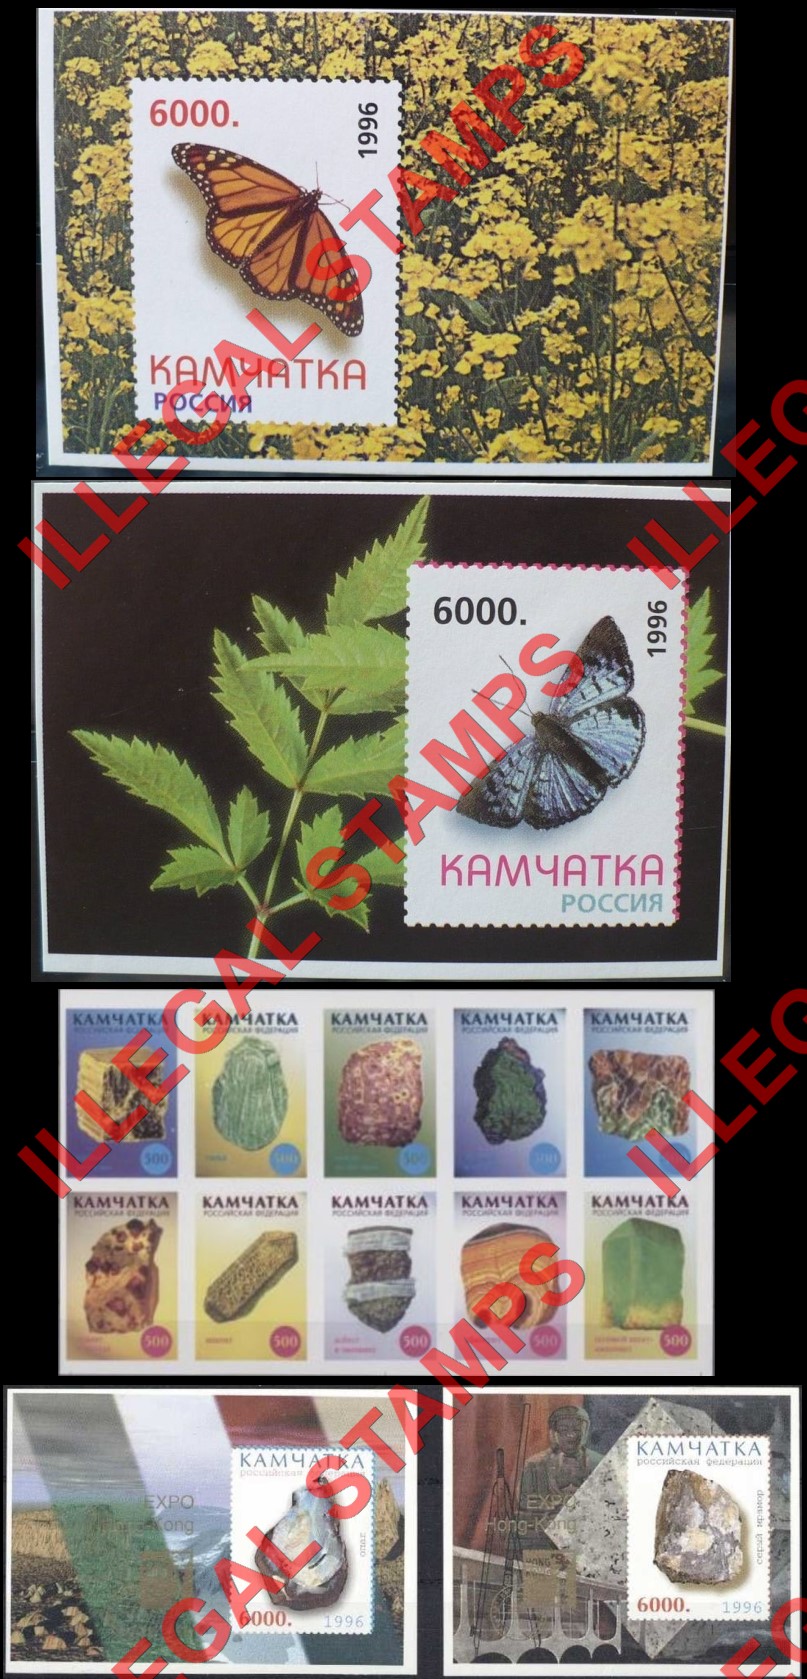 Kamchatka Region 1996 Butterflies and Minerals Illegal Stamps